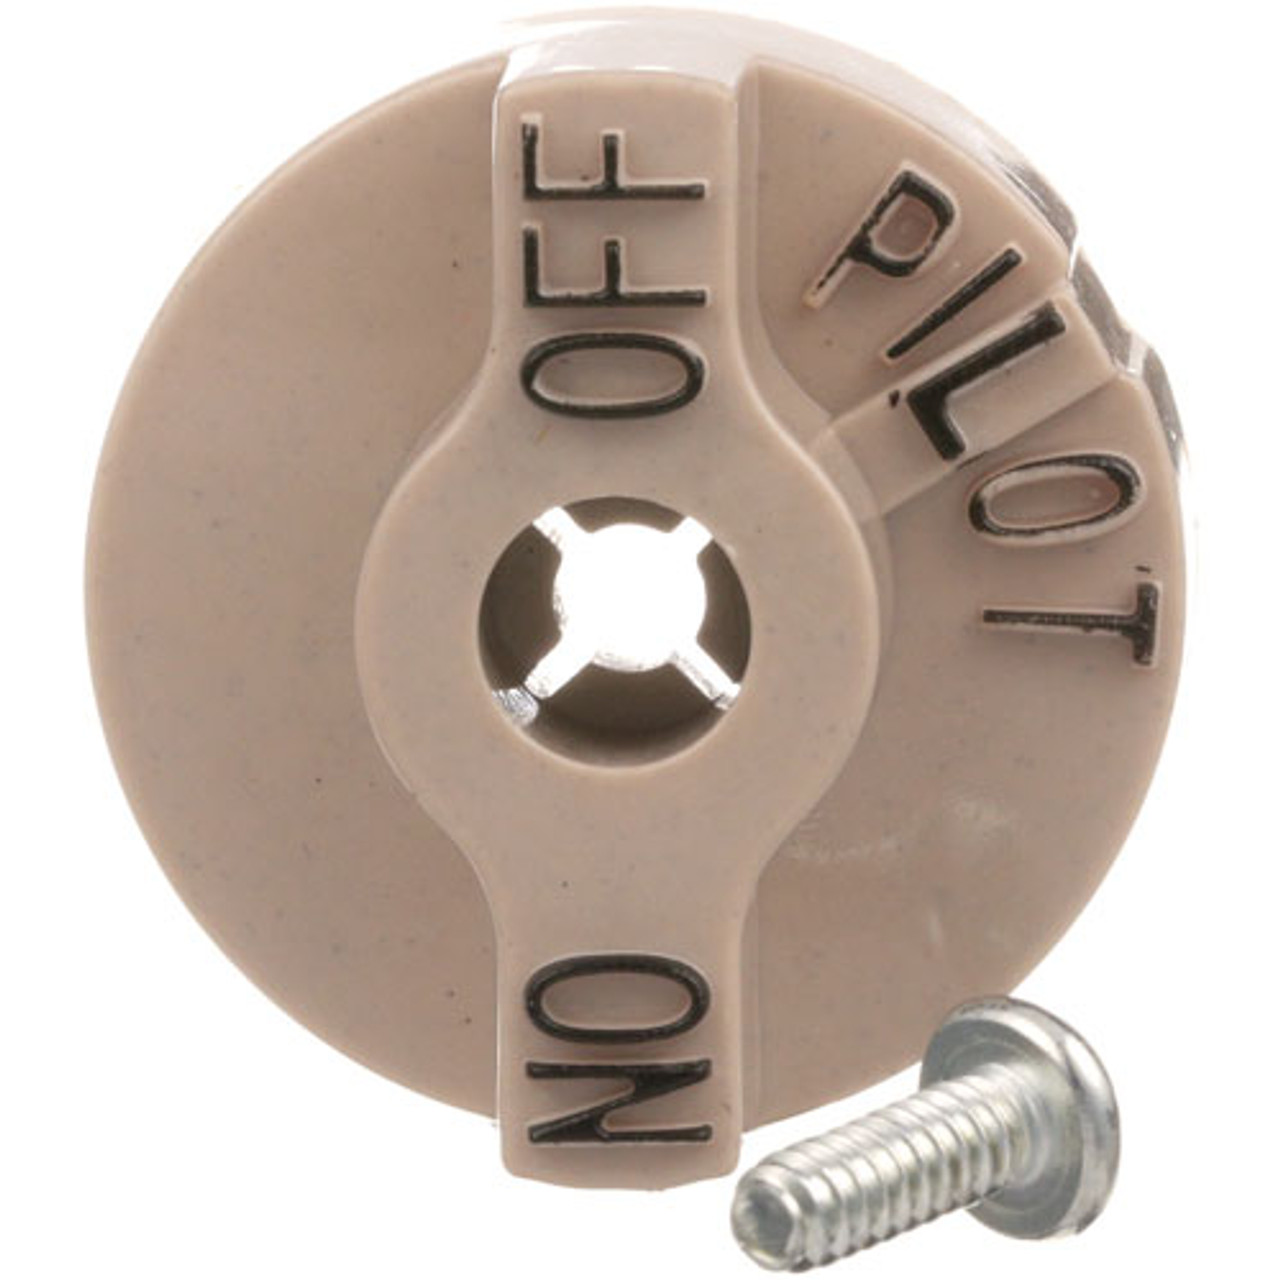 Valve Knob 1-1/4 D, Off-Pilot-On - Replacement Part For Garland 2516-1